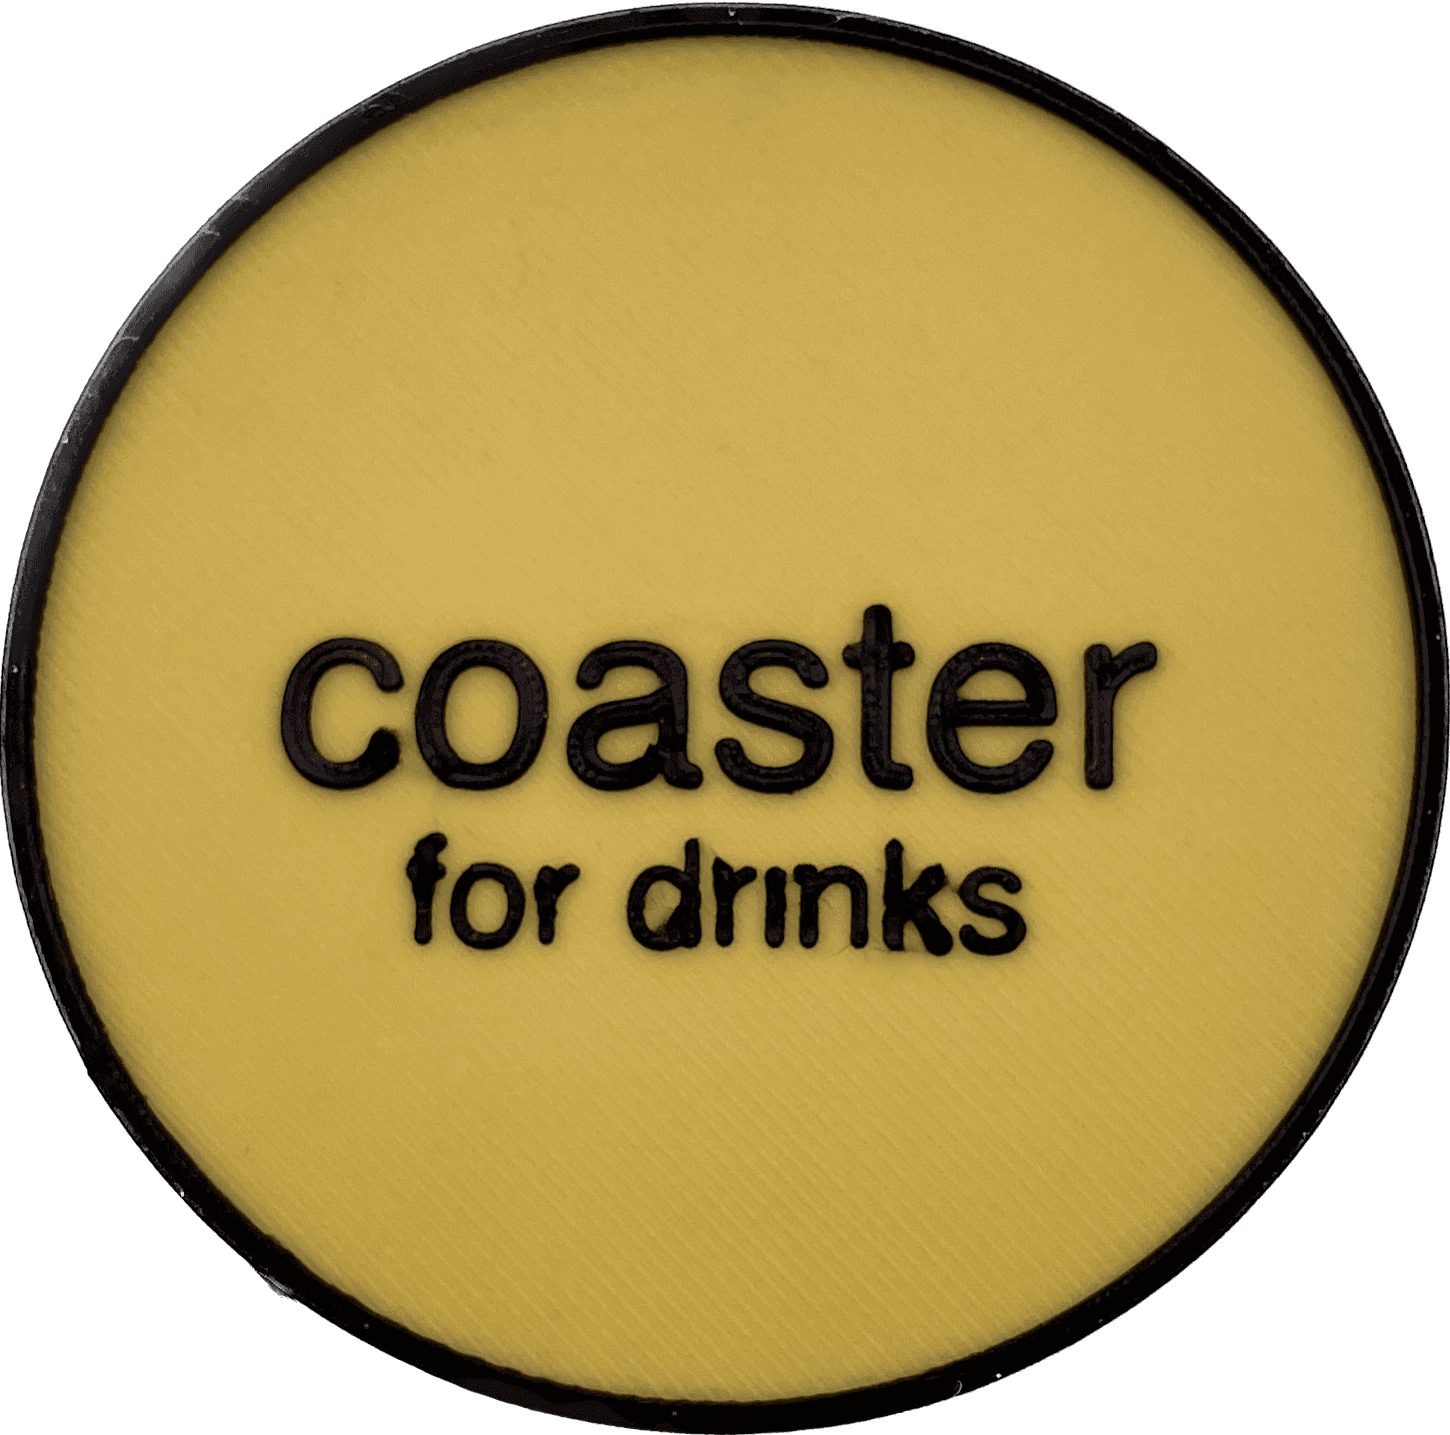 Canada Coaster for Drinks.stl 3d model